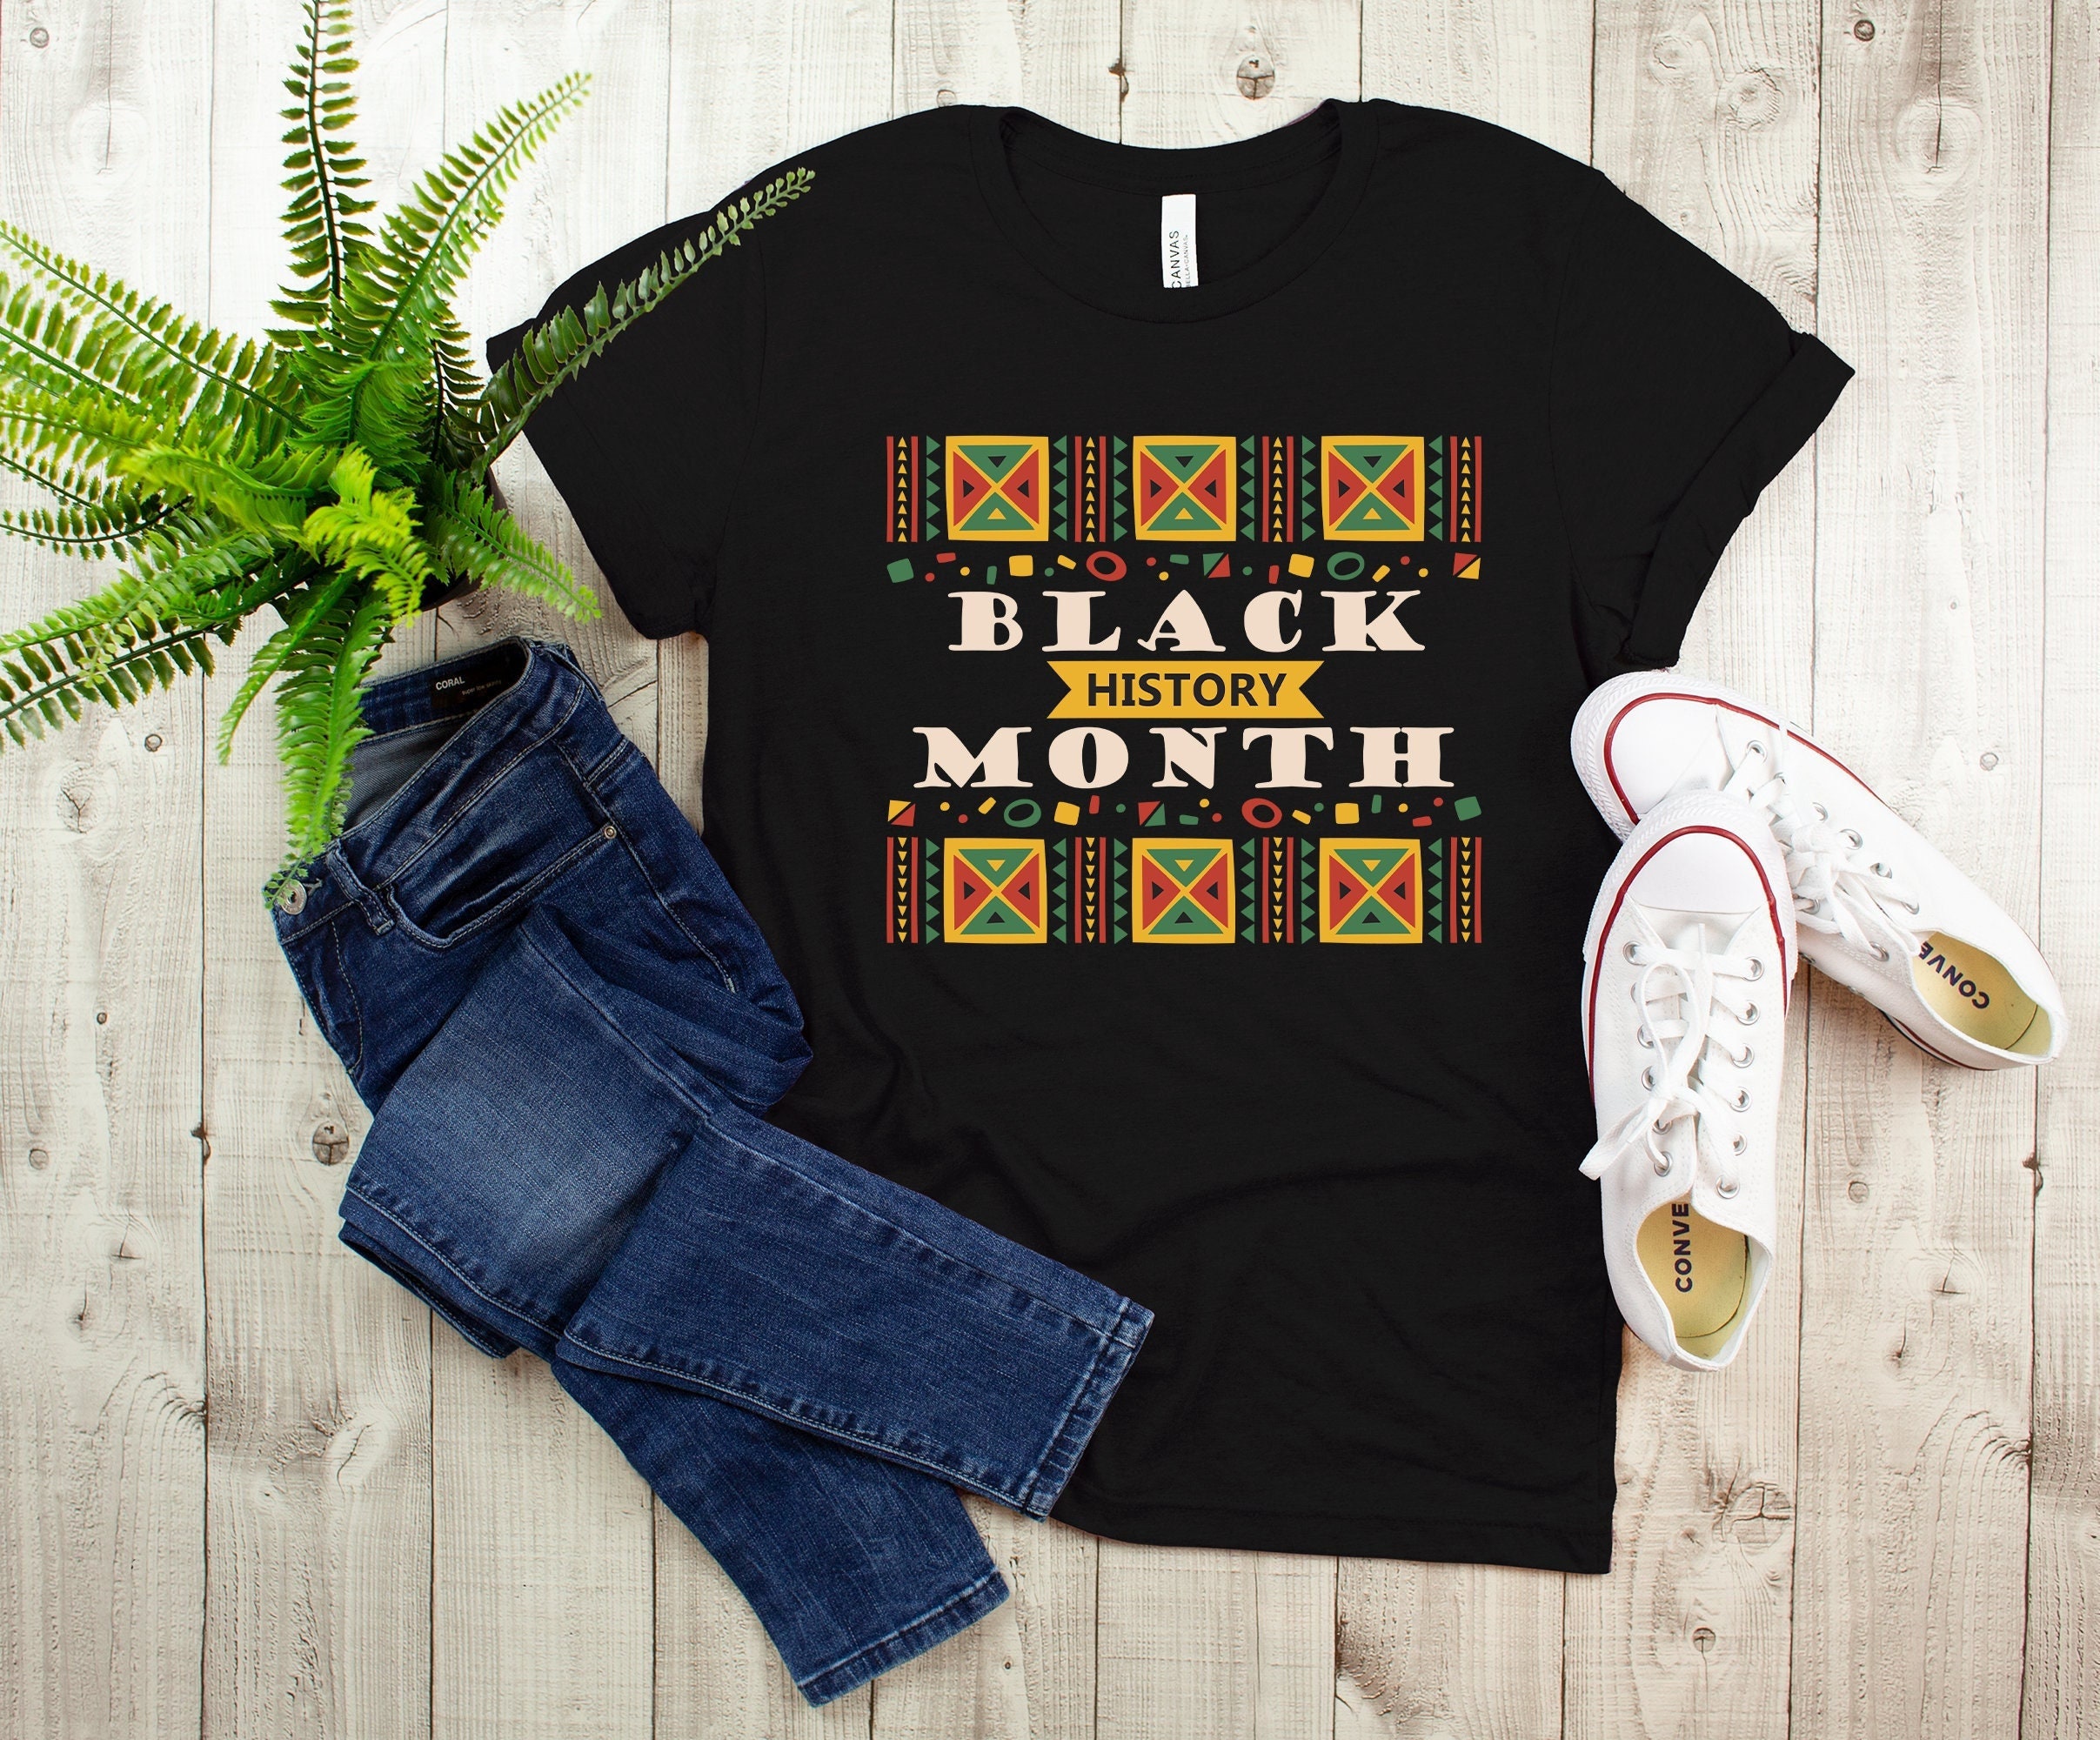 Discover Black History Month T-shirt, Black History